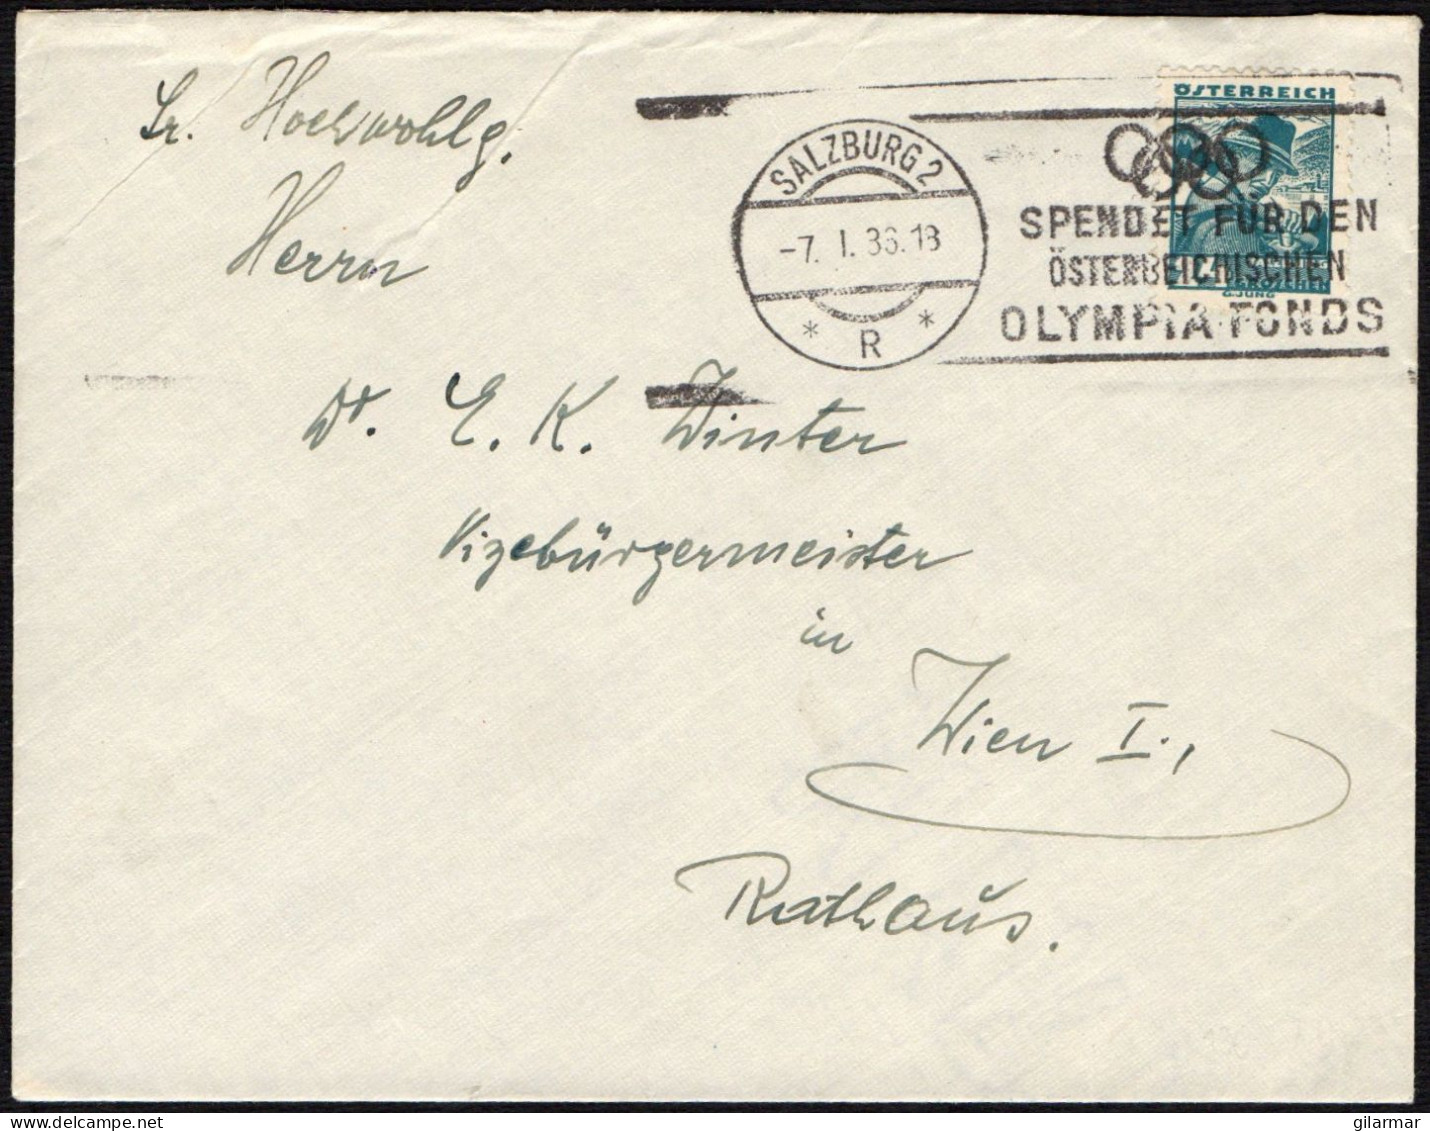 OLYMPIC GAMES 1936 - AUSTRIA SALZBURG 1936 - DONATE TO THE AUSTRIAN OLYMPIC FUND - MAILED ENVELOPE - M - Estate 1936: Berlino